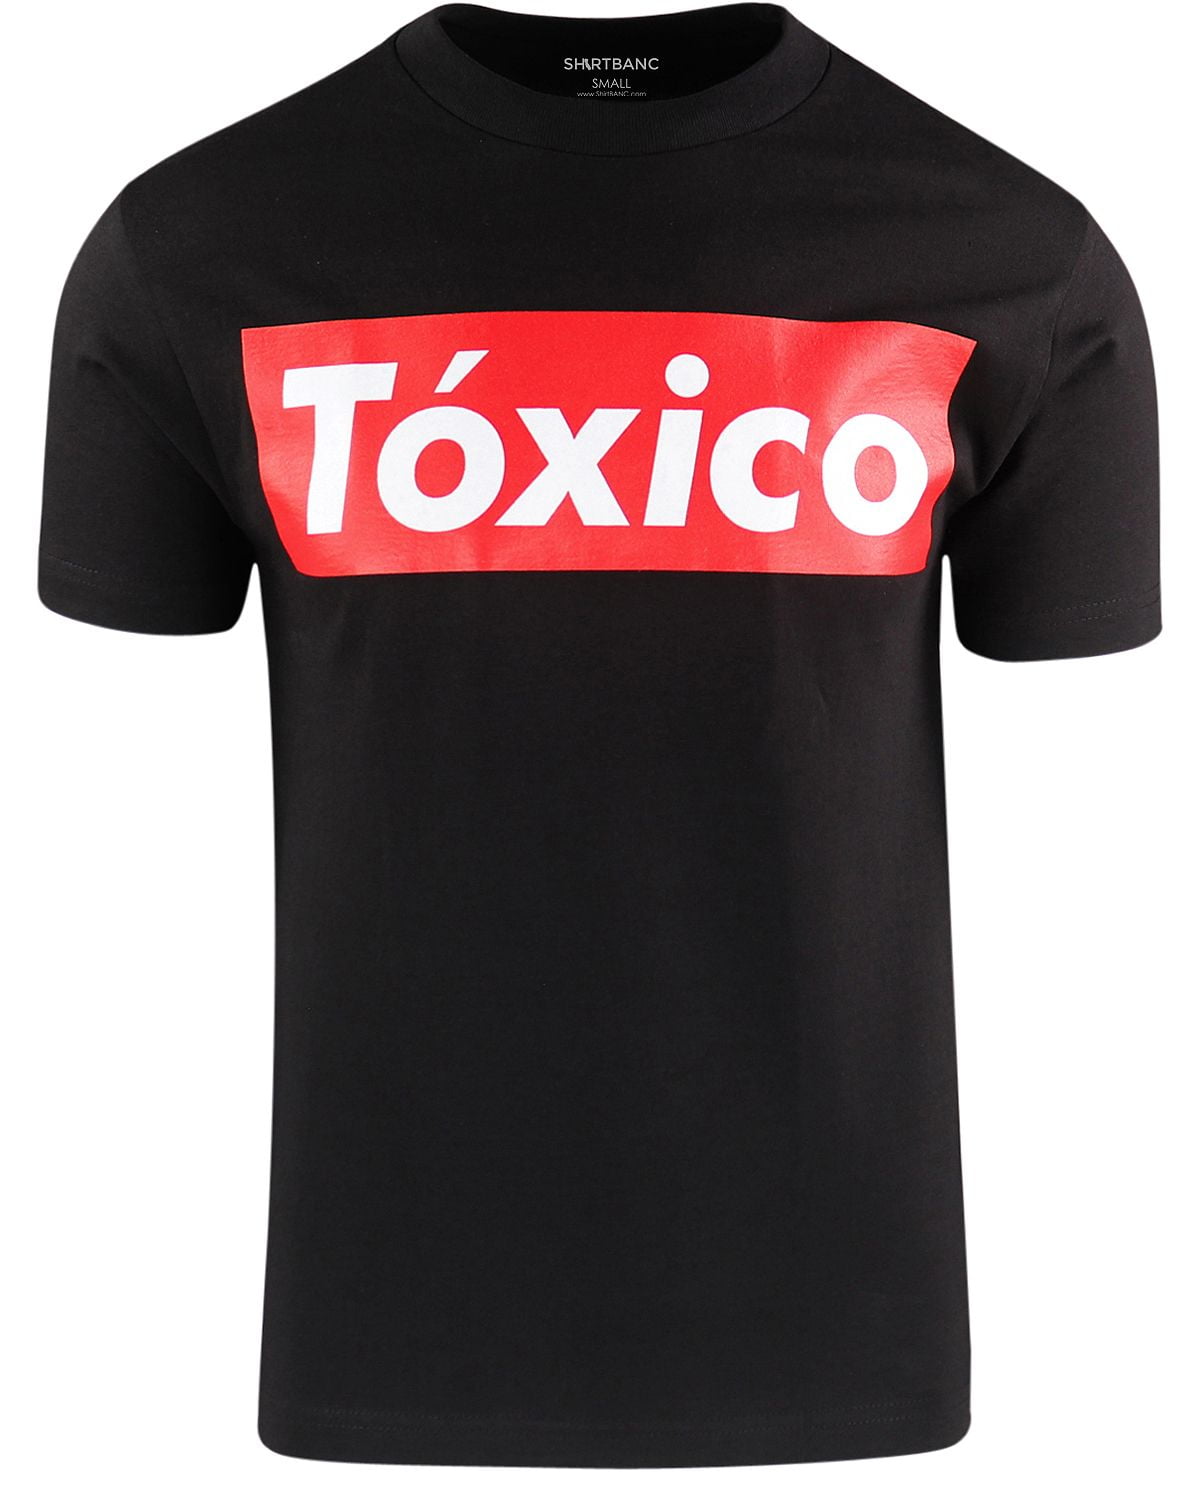 Toxico Apparel - Toxico Apparel updated their cover photo.